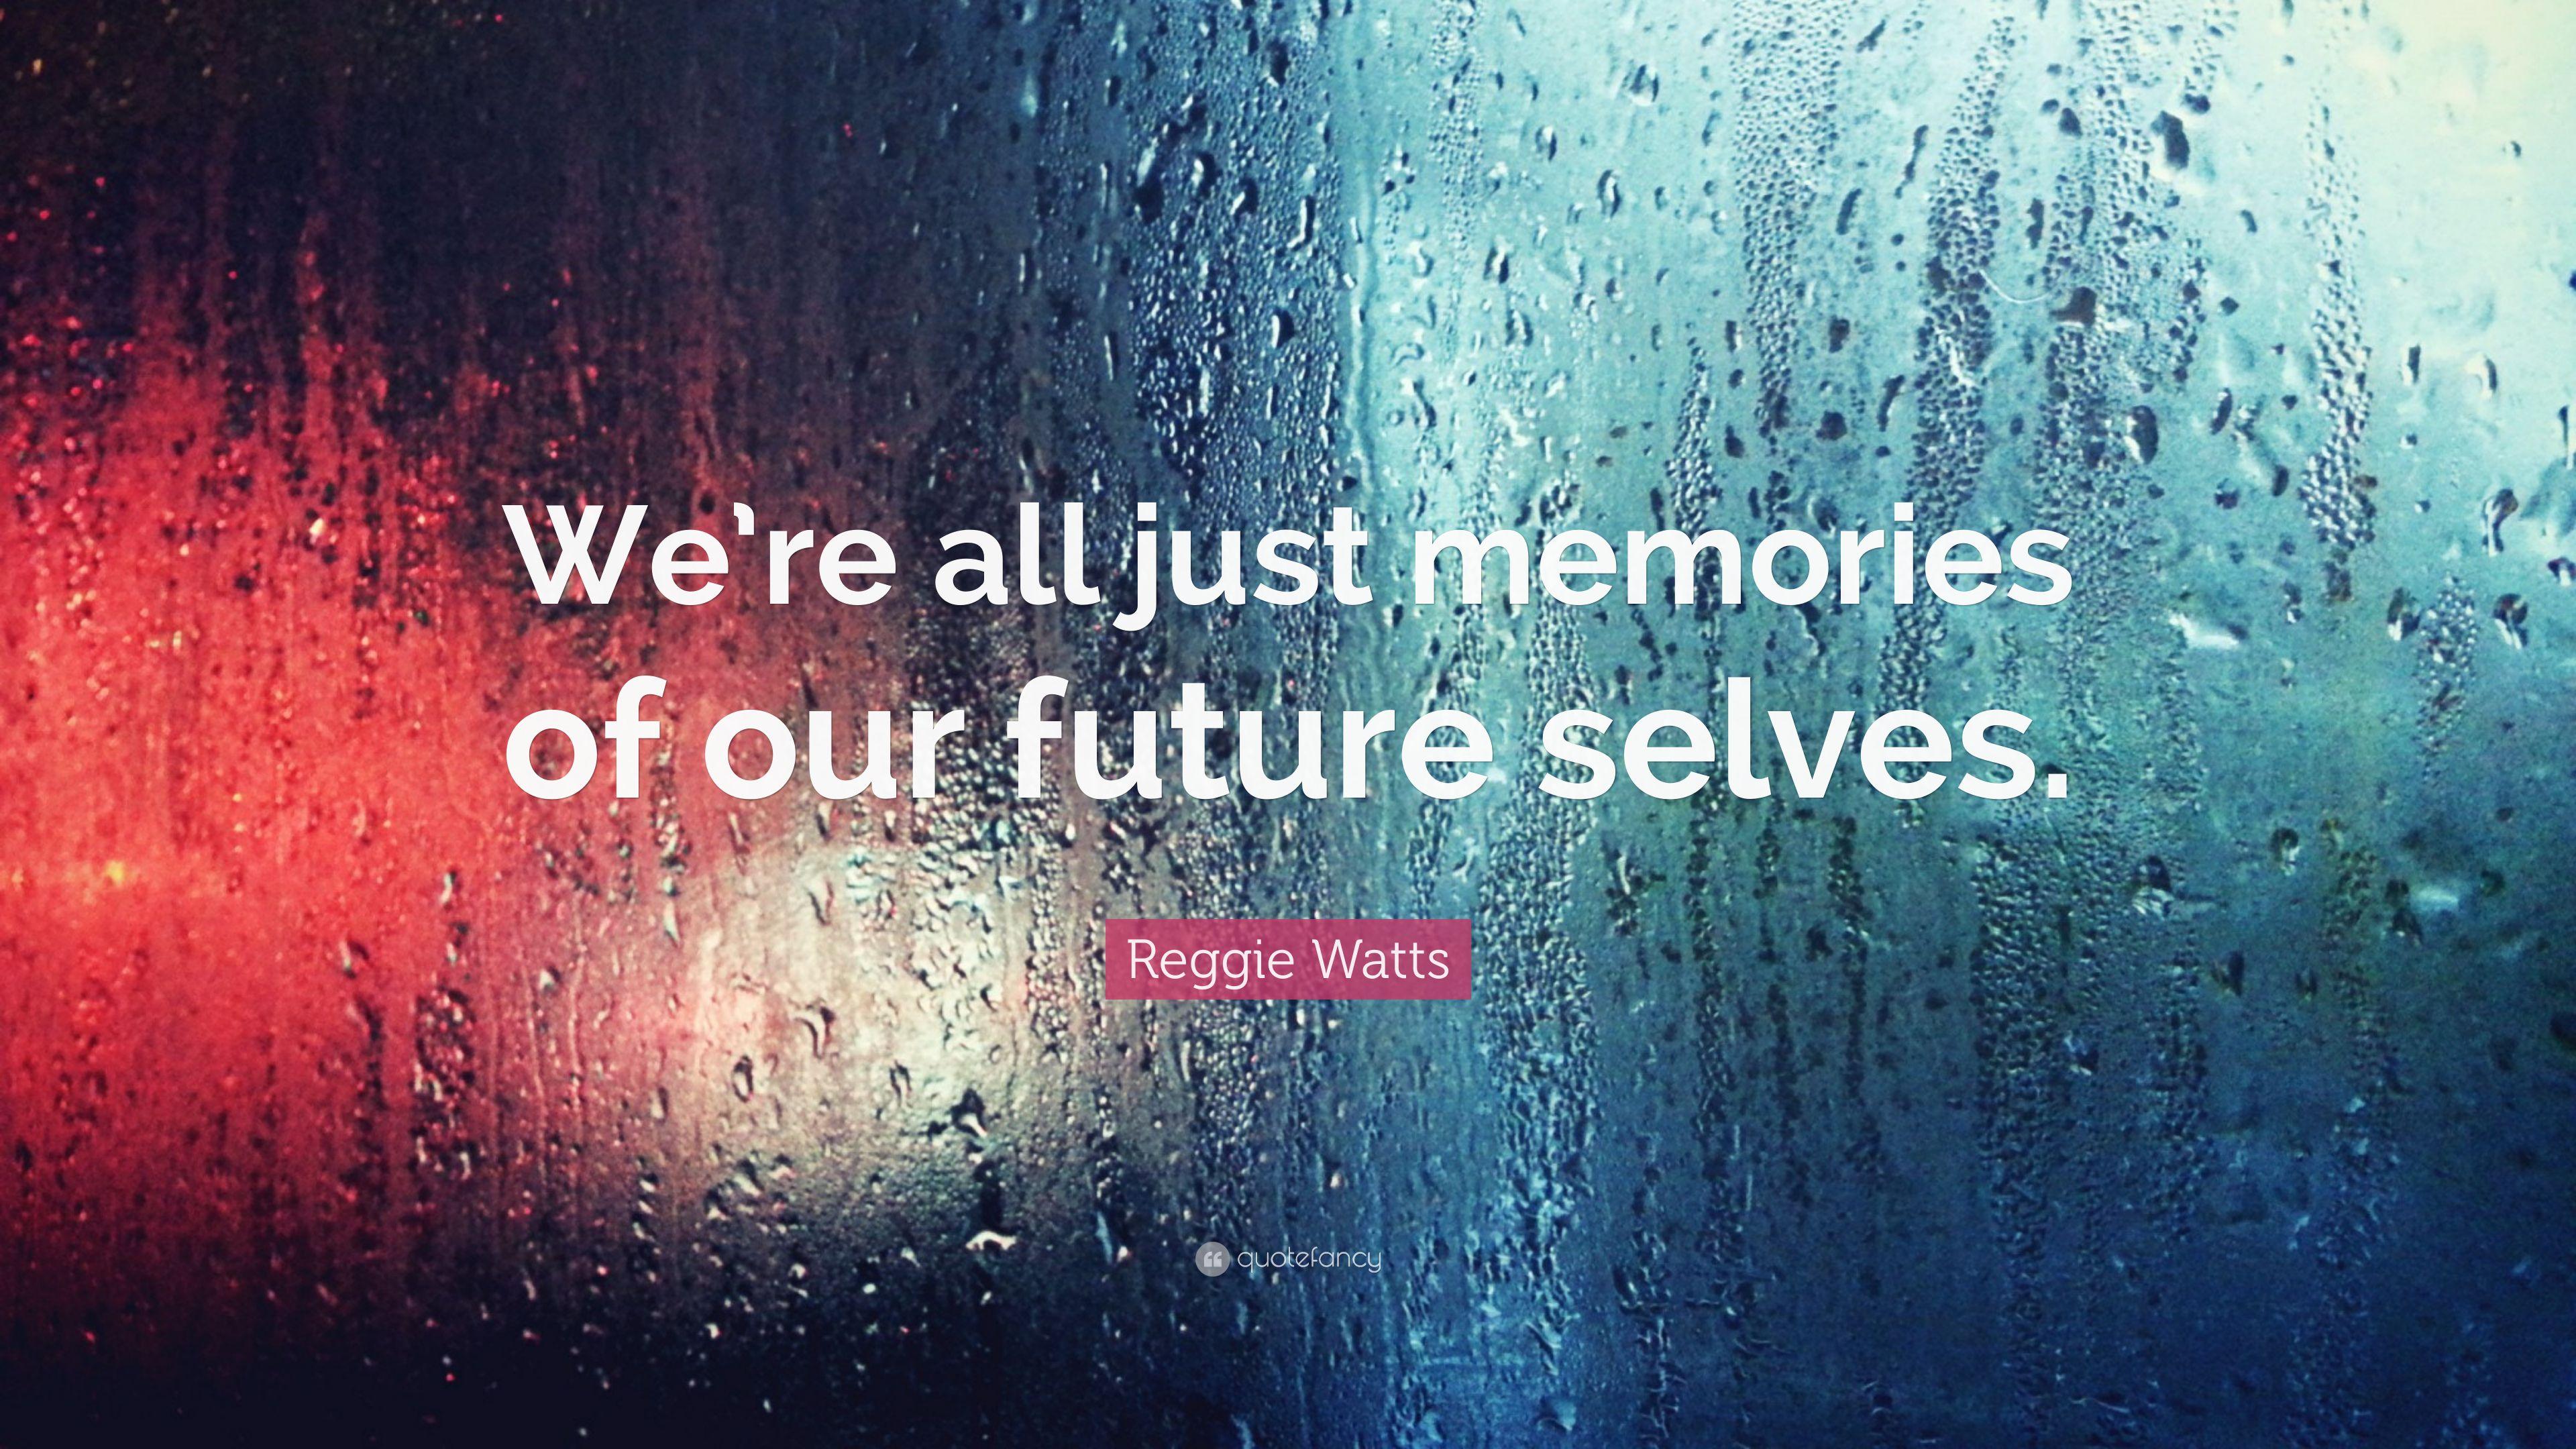 Reggie Watts Quote: “We're all just memories of our future selves